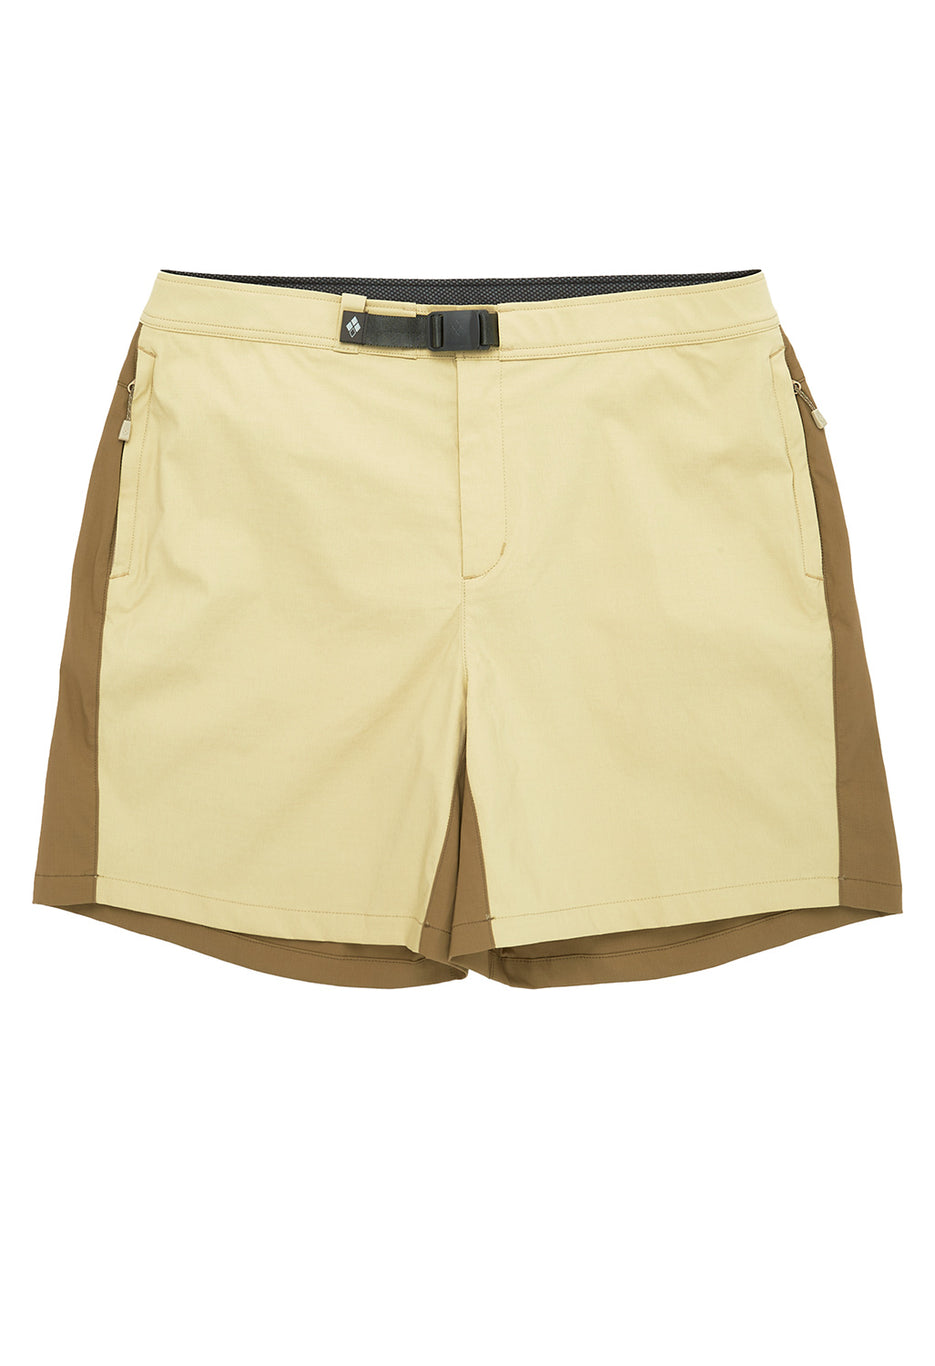 Montbell Women's Canyon Shorts - Tan